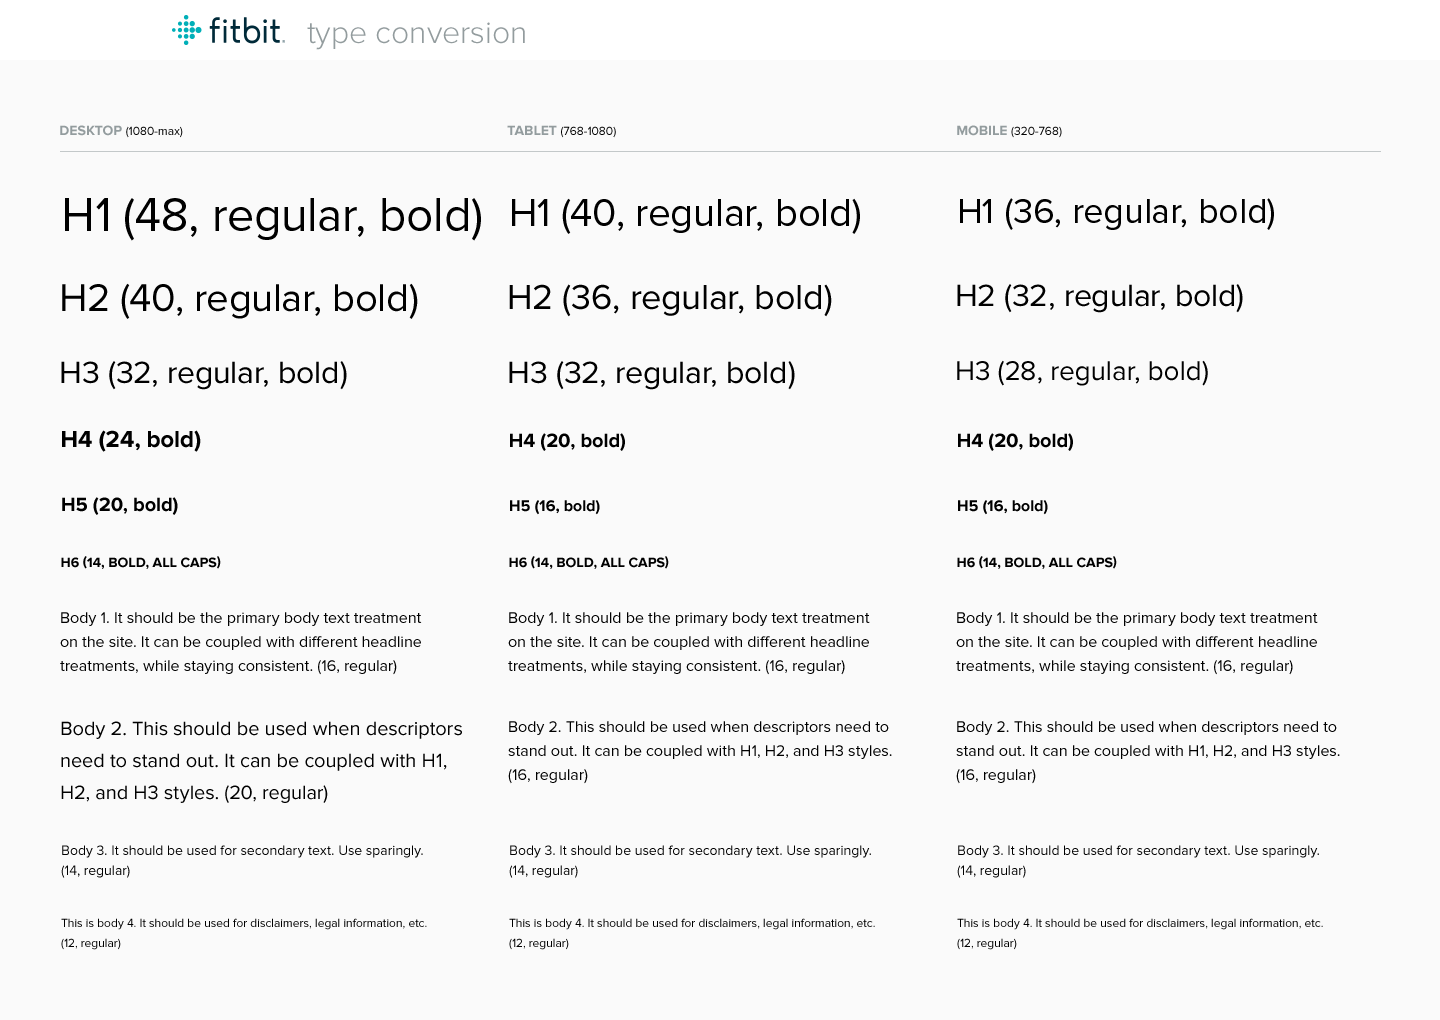 Fitbit_style-guide_0001_type-conversion.png